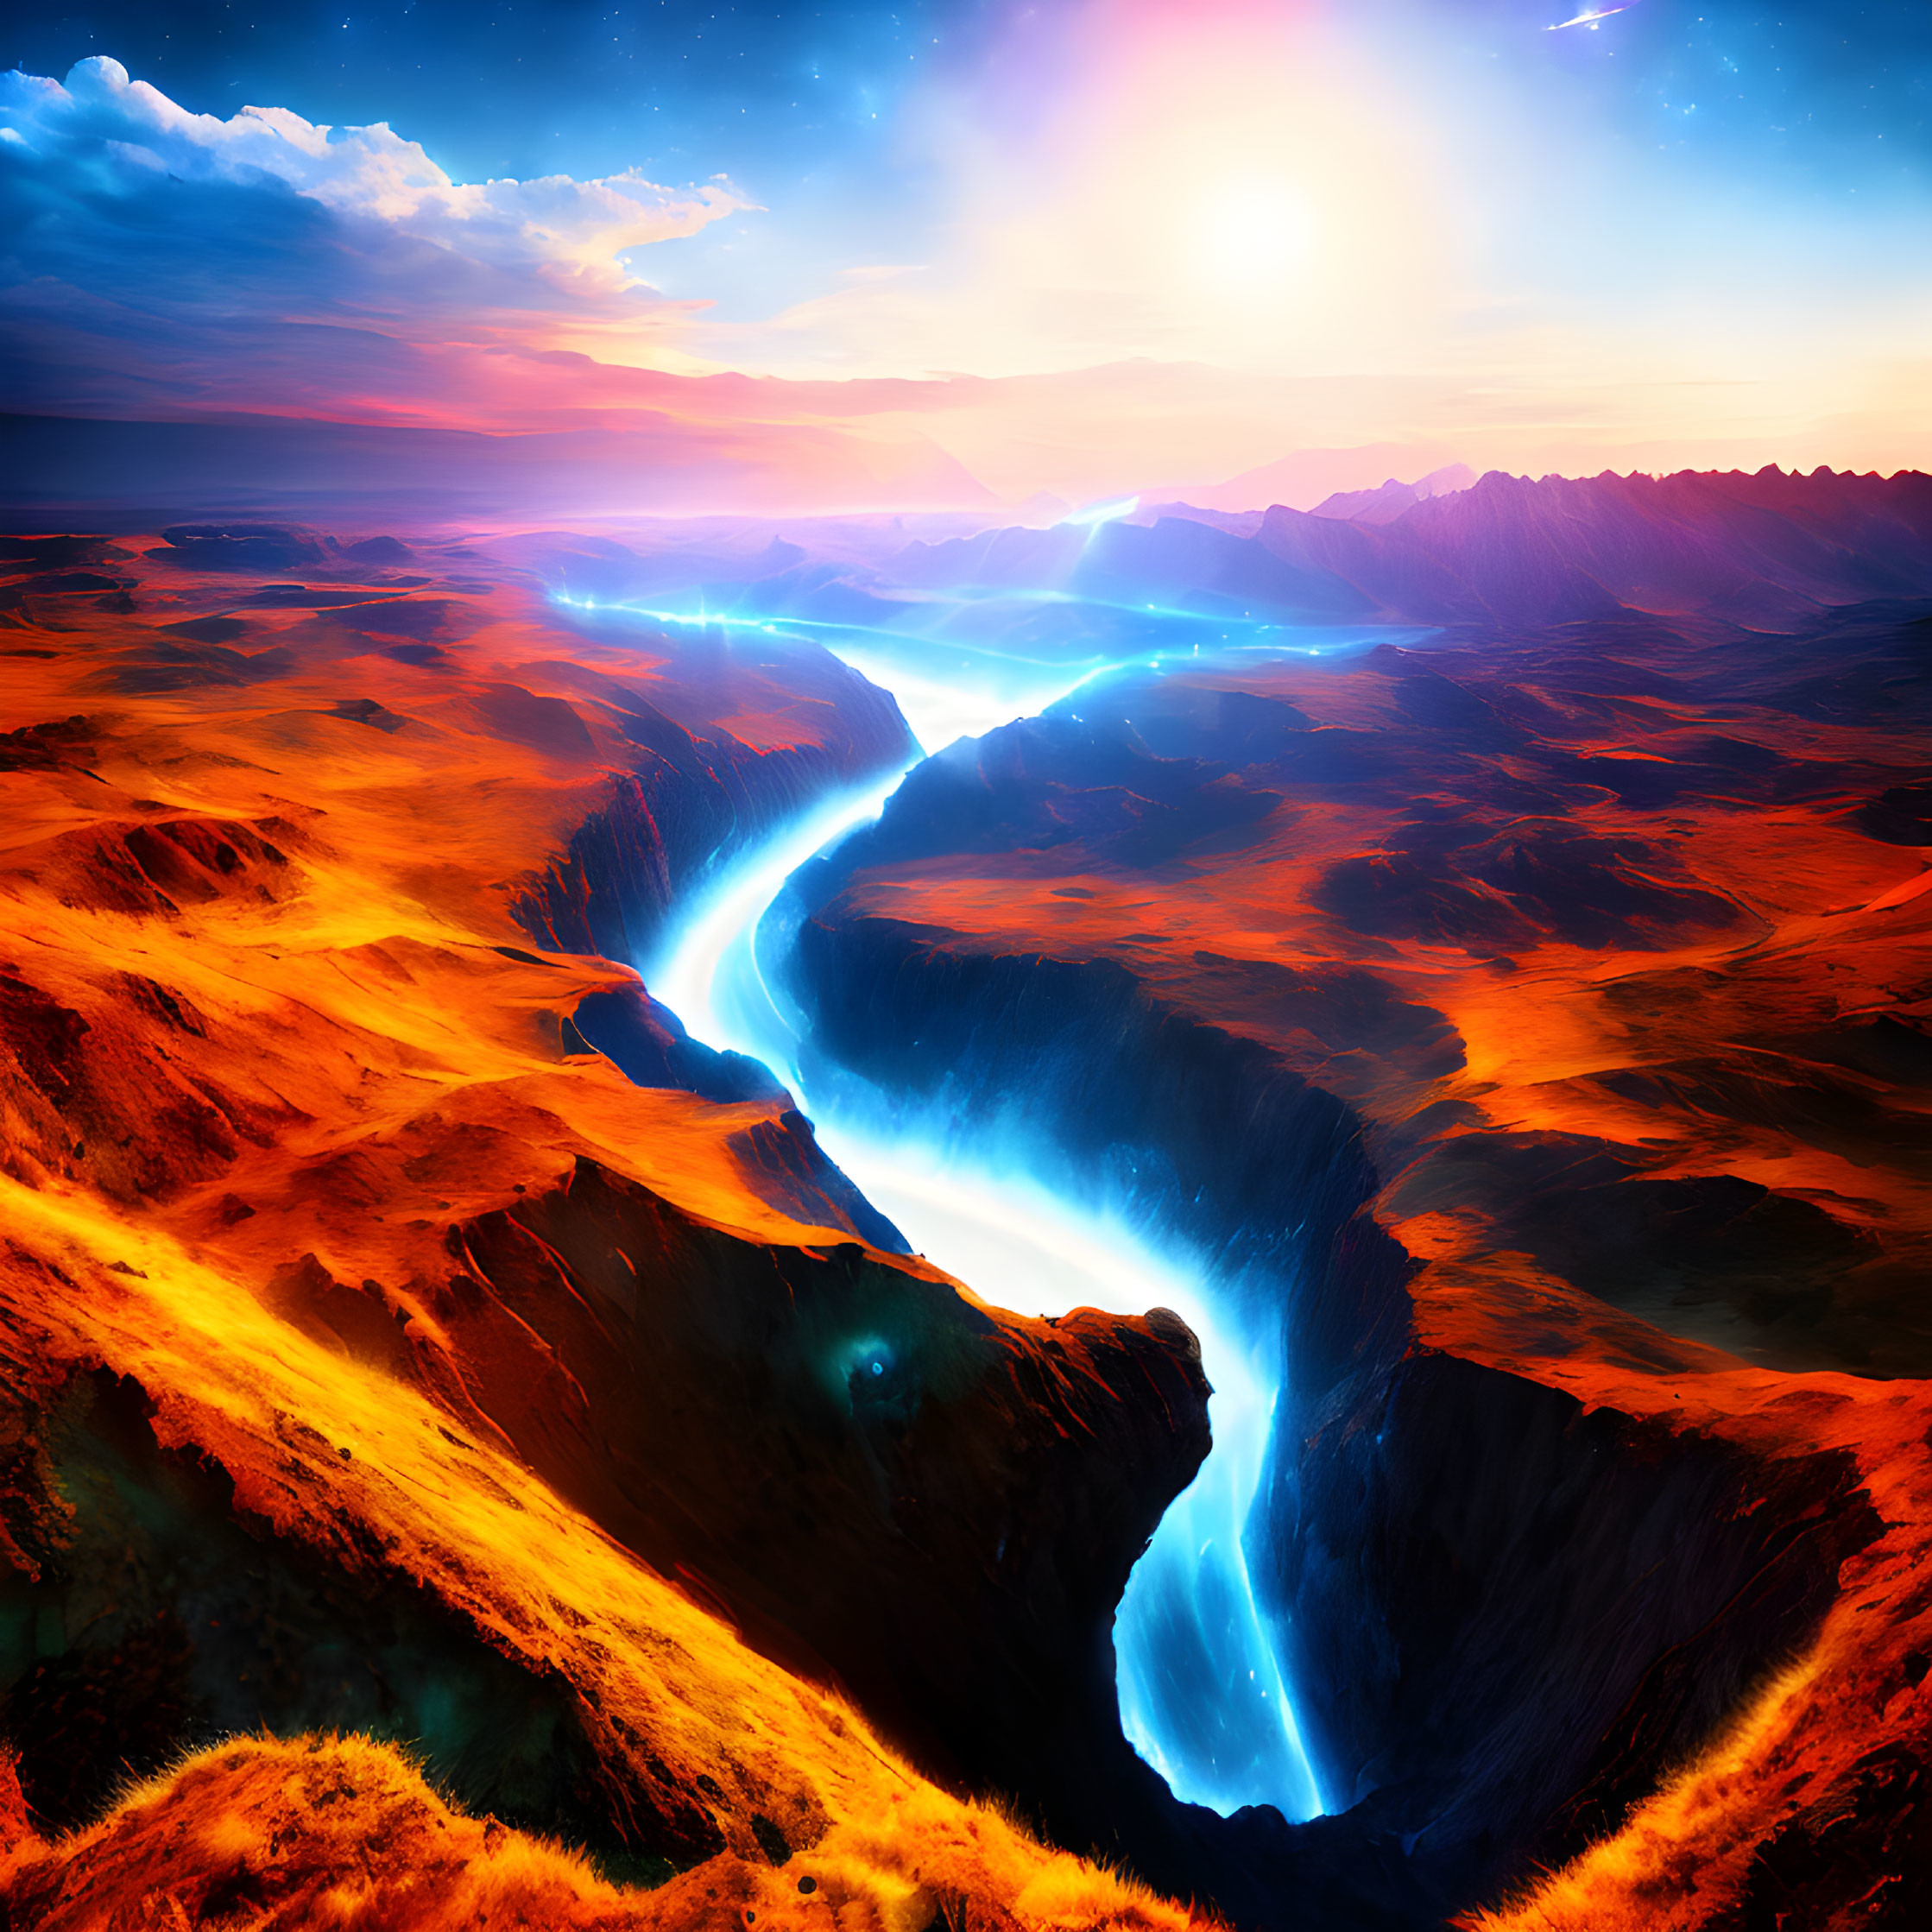 Surreal fiery landscape with glowing blue river under twilight sky